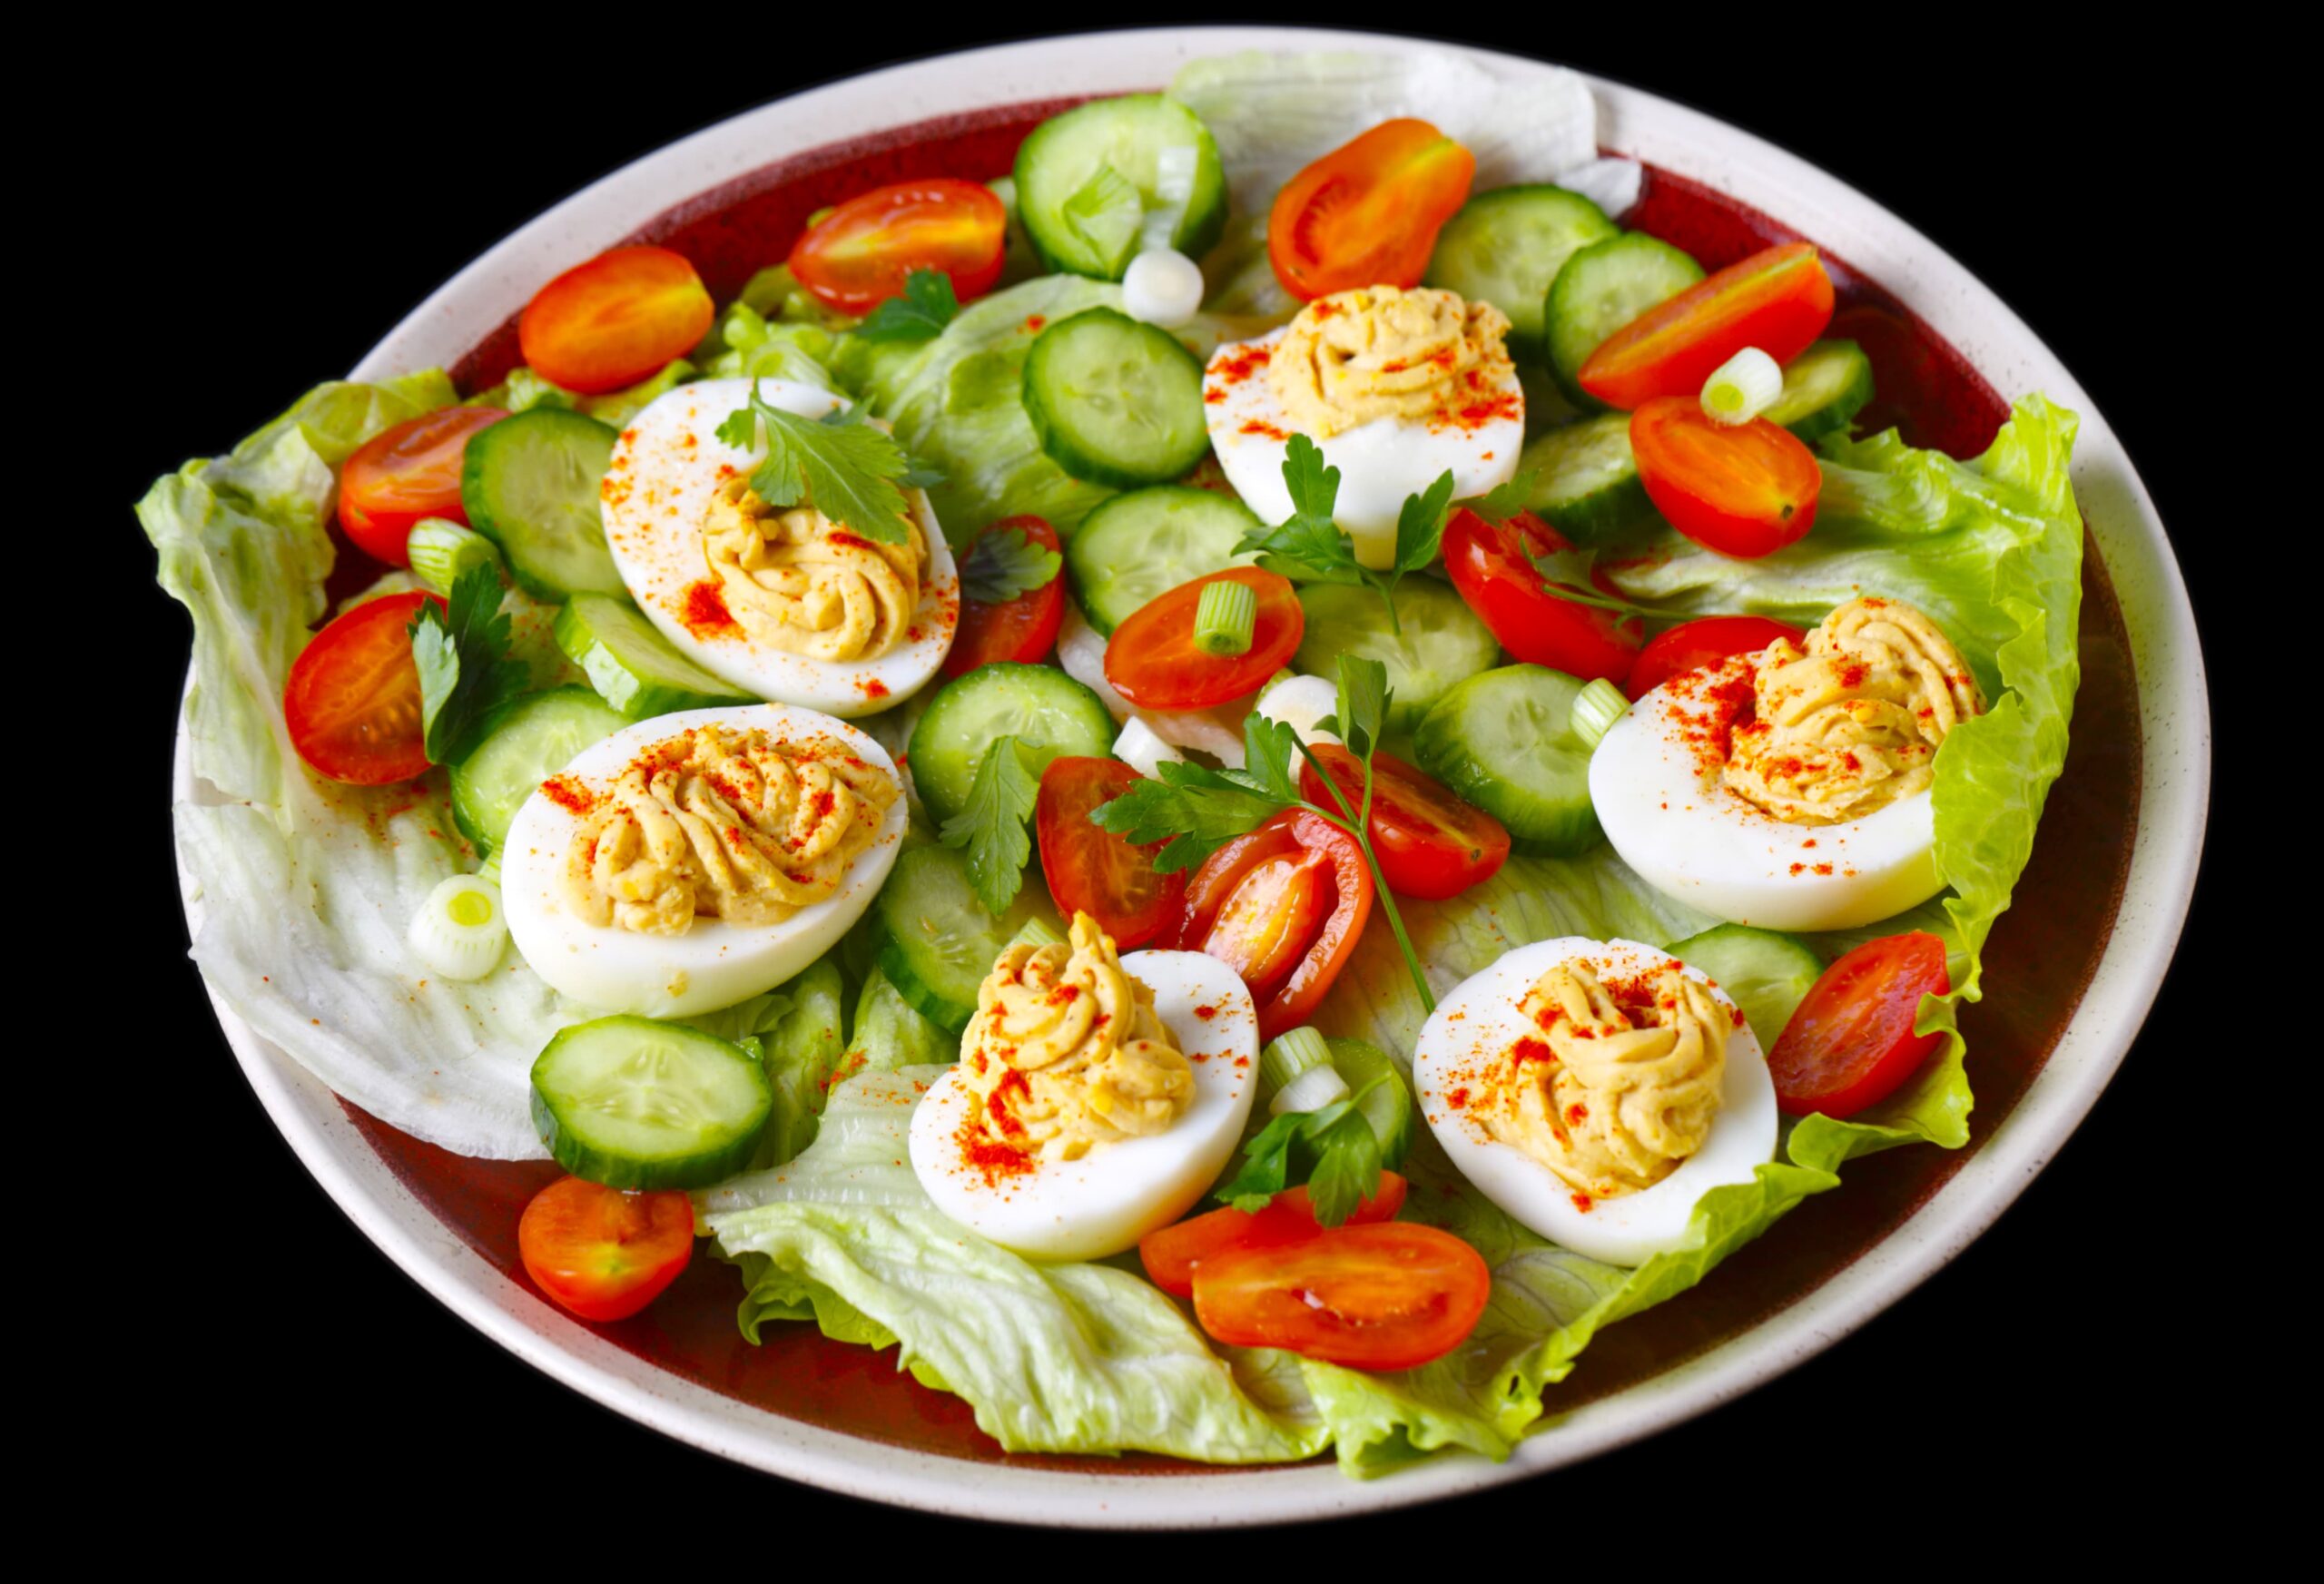 Diabetes-approved Side Dishes